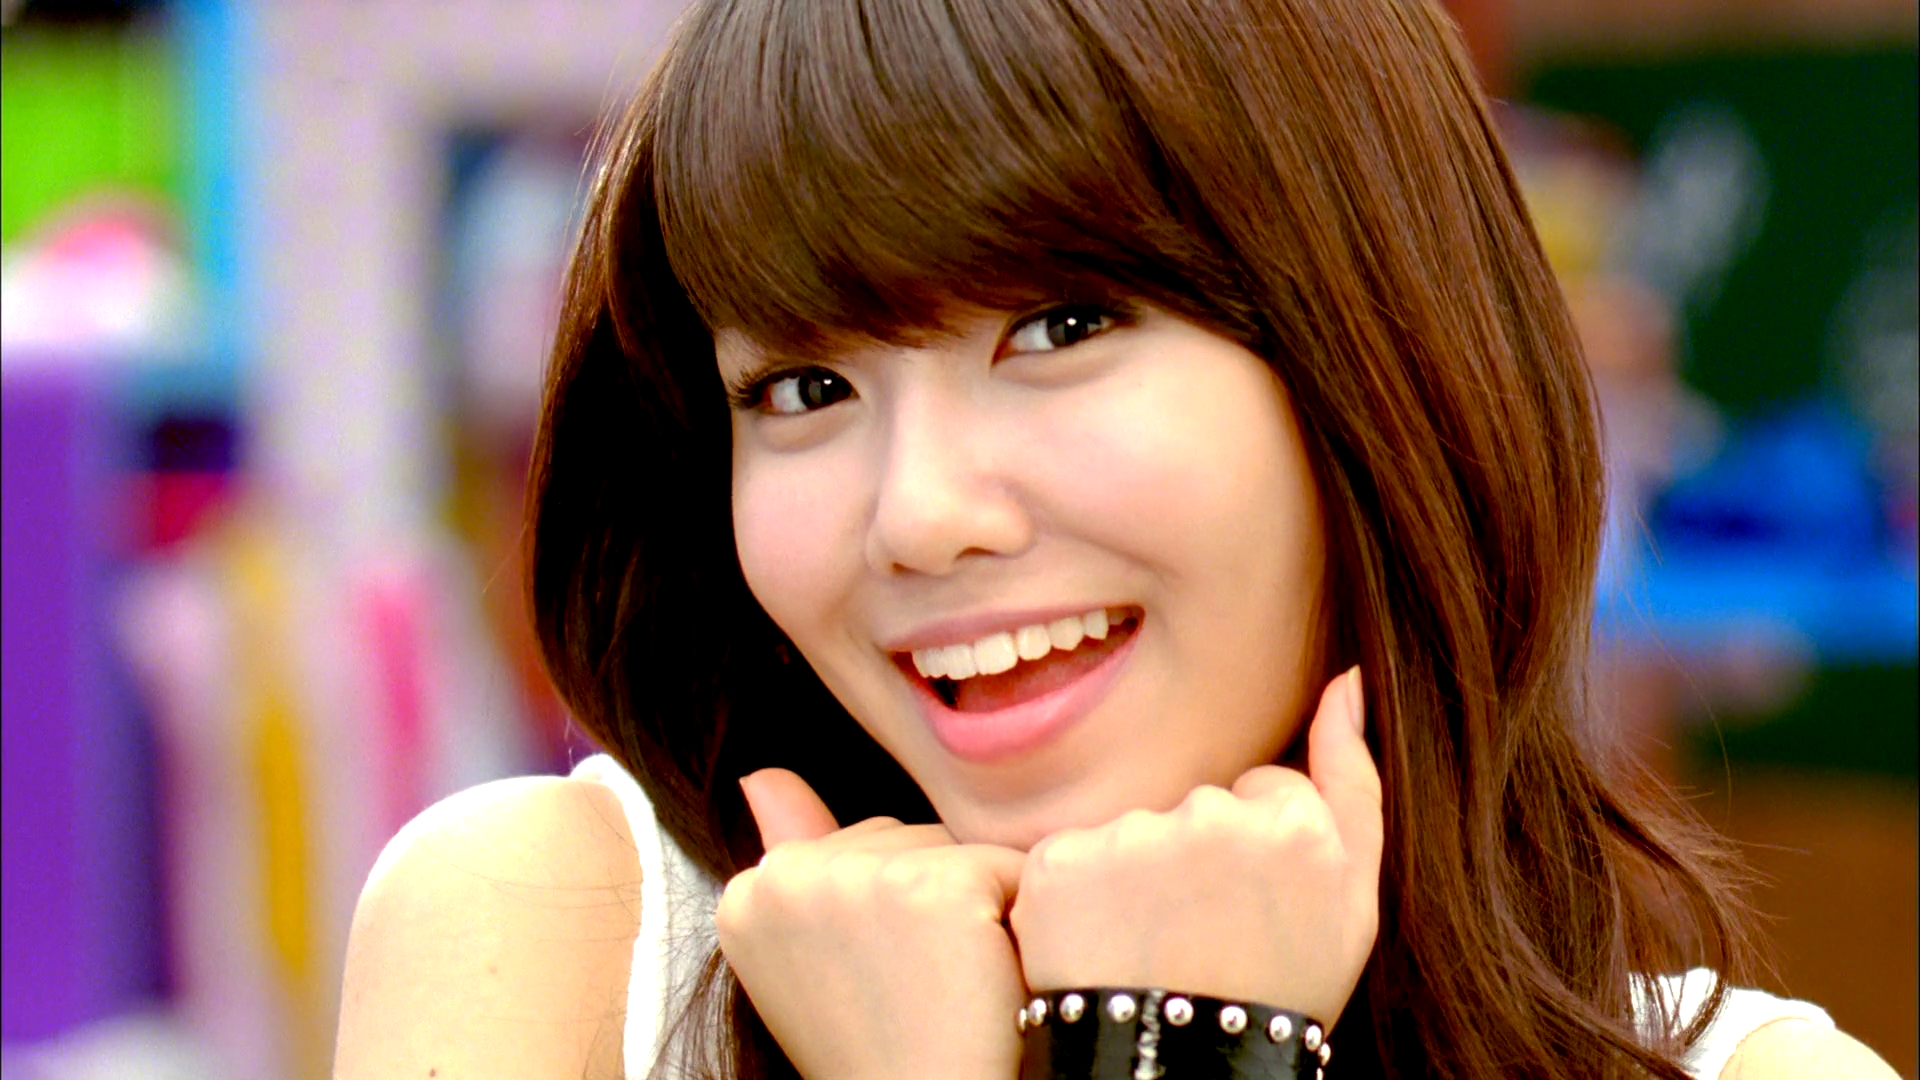 Image Gallery Sooyoung Wallpaper